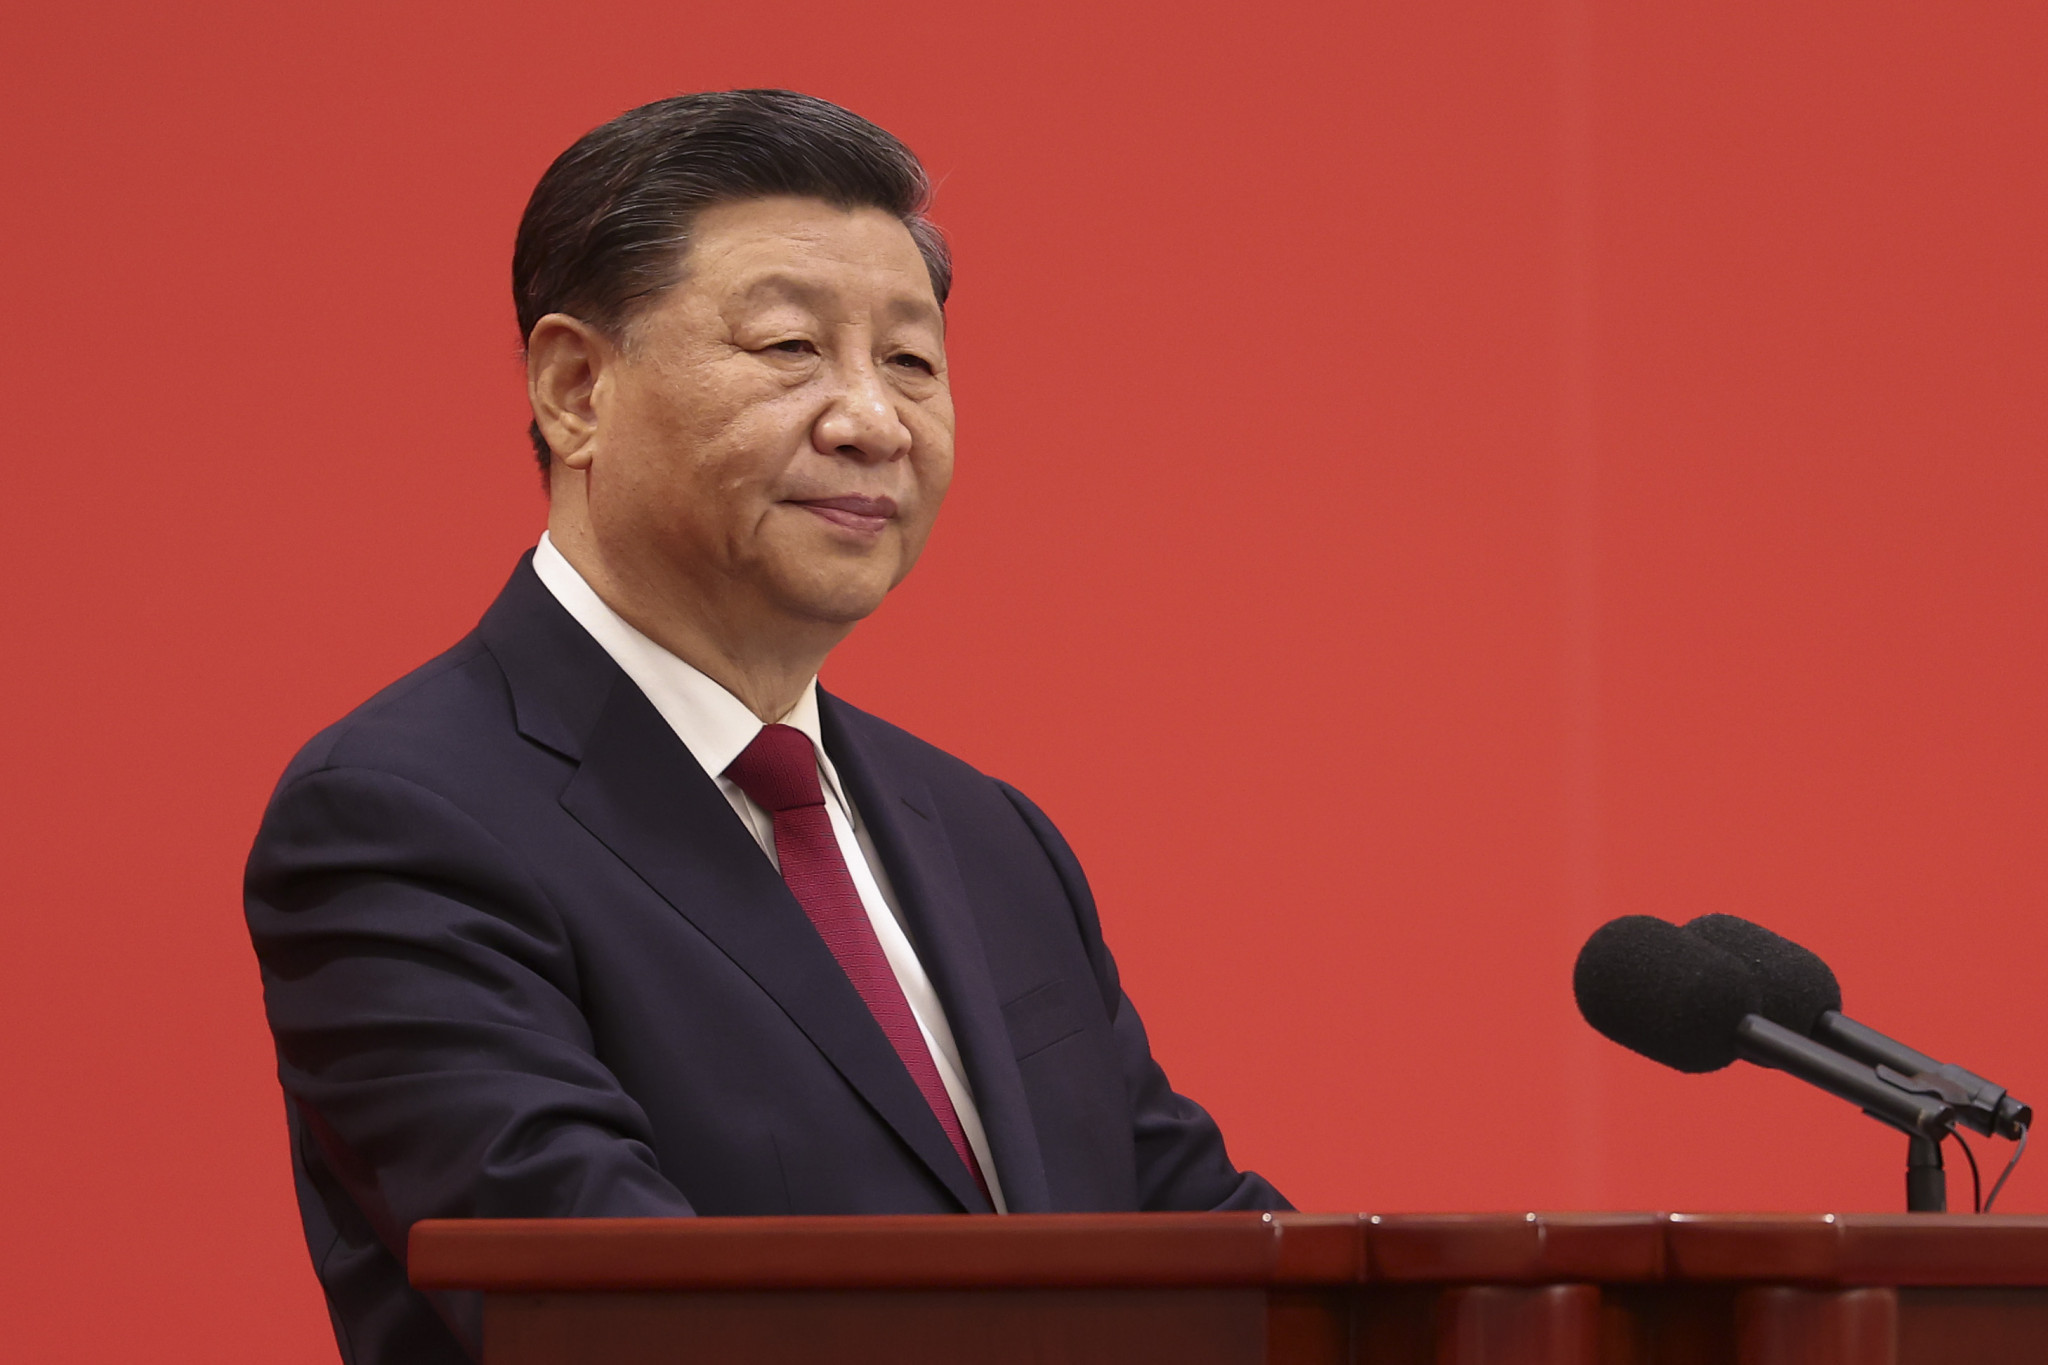 Zero-COVID advocate Xi to remain Chinese President for Asian Games